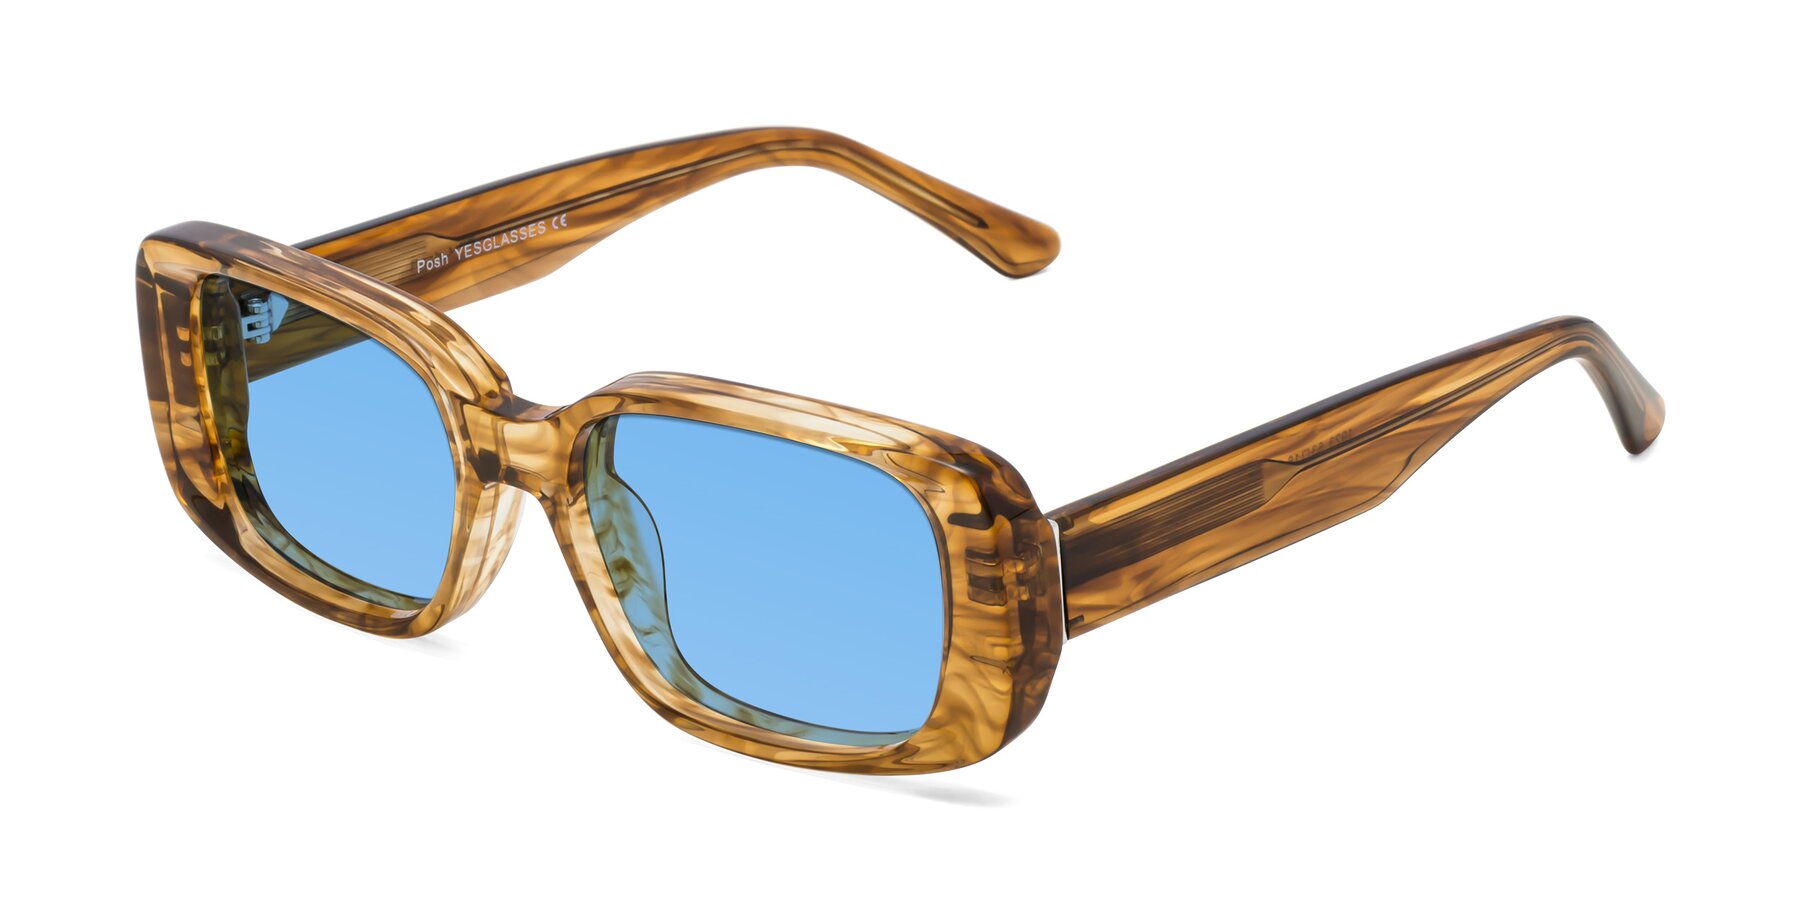 Angle of Posh in Stripe Amber with Medium Blue Tinted Lenses